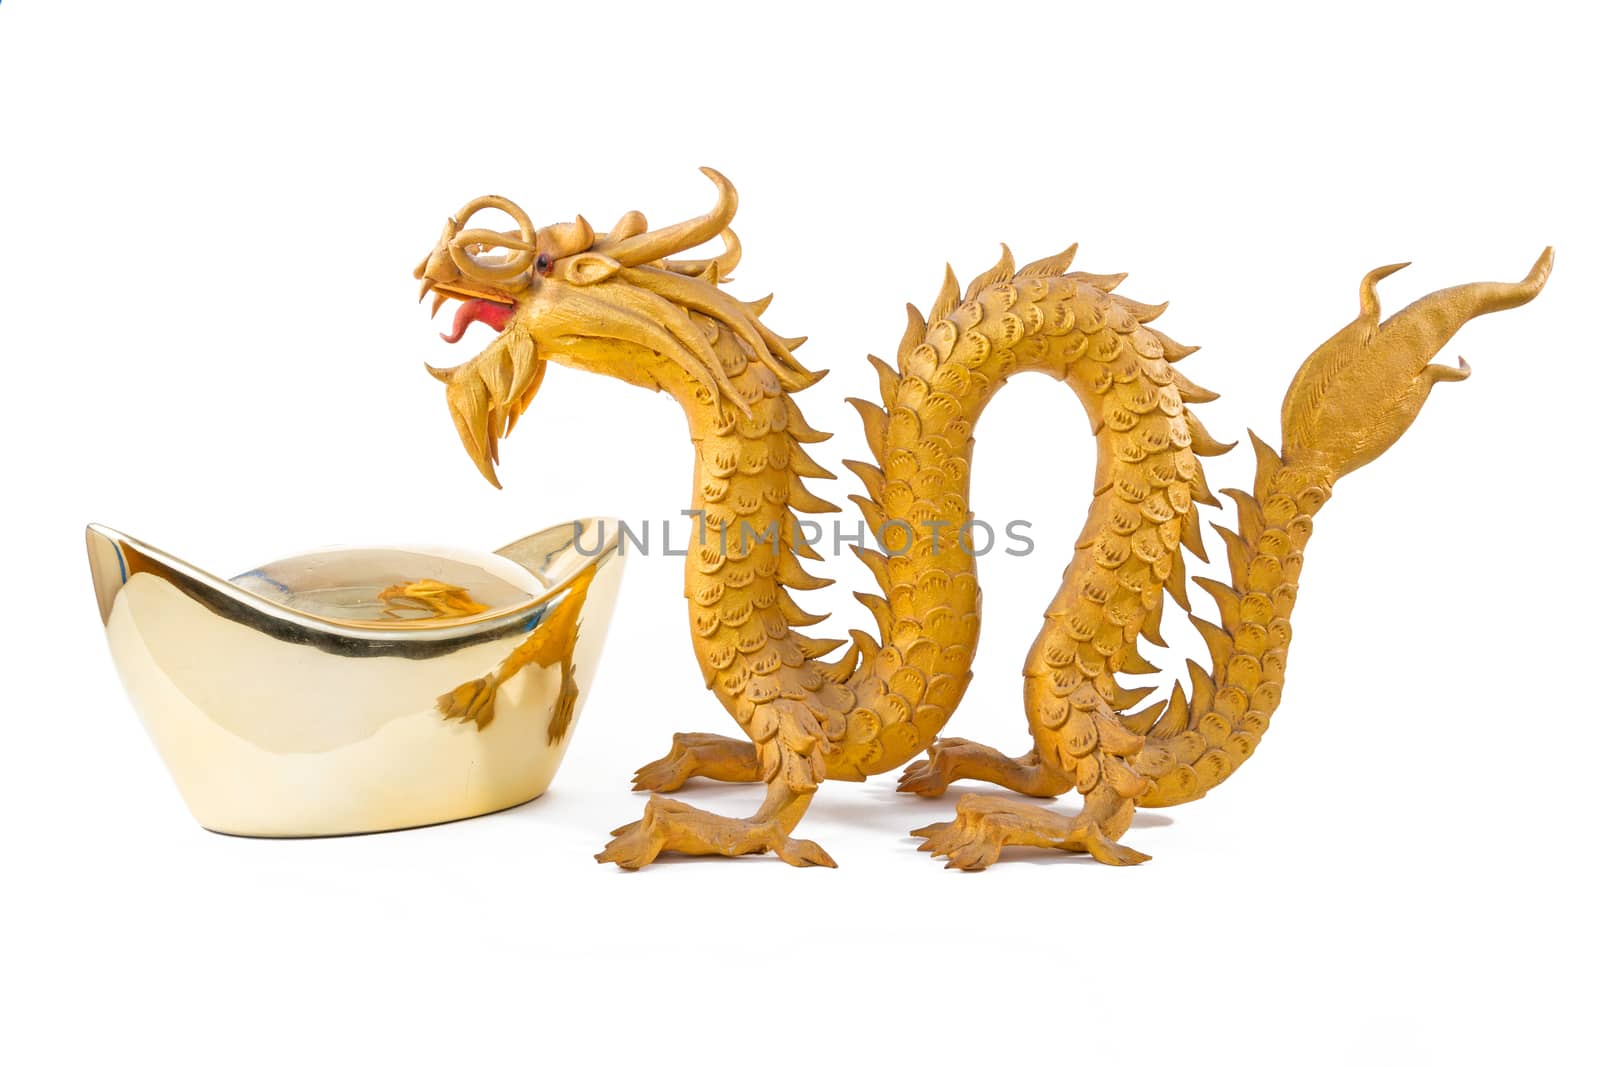 Chinese gold ingot and GoldenDragon isolated on white background